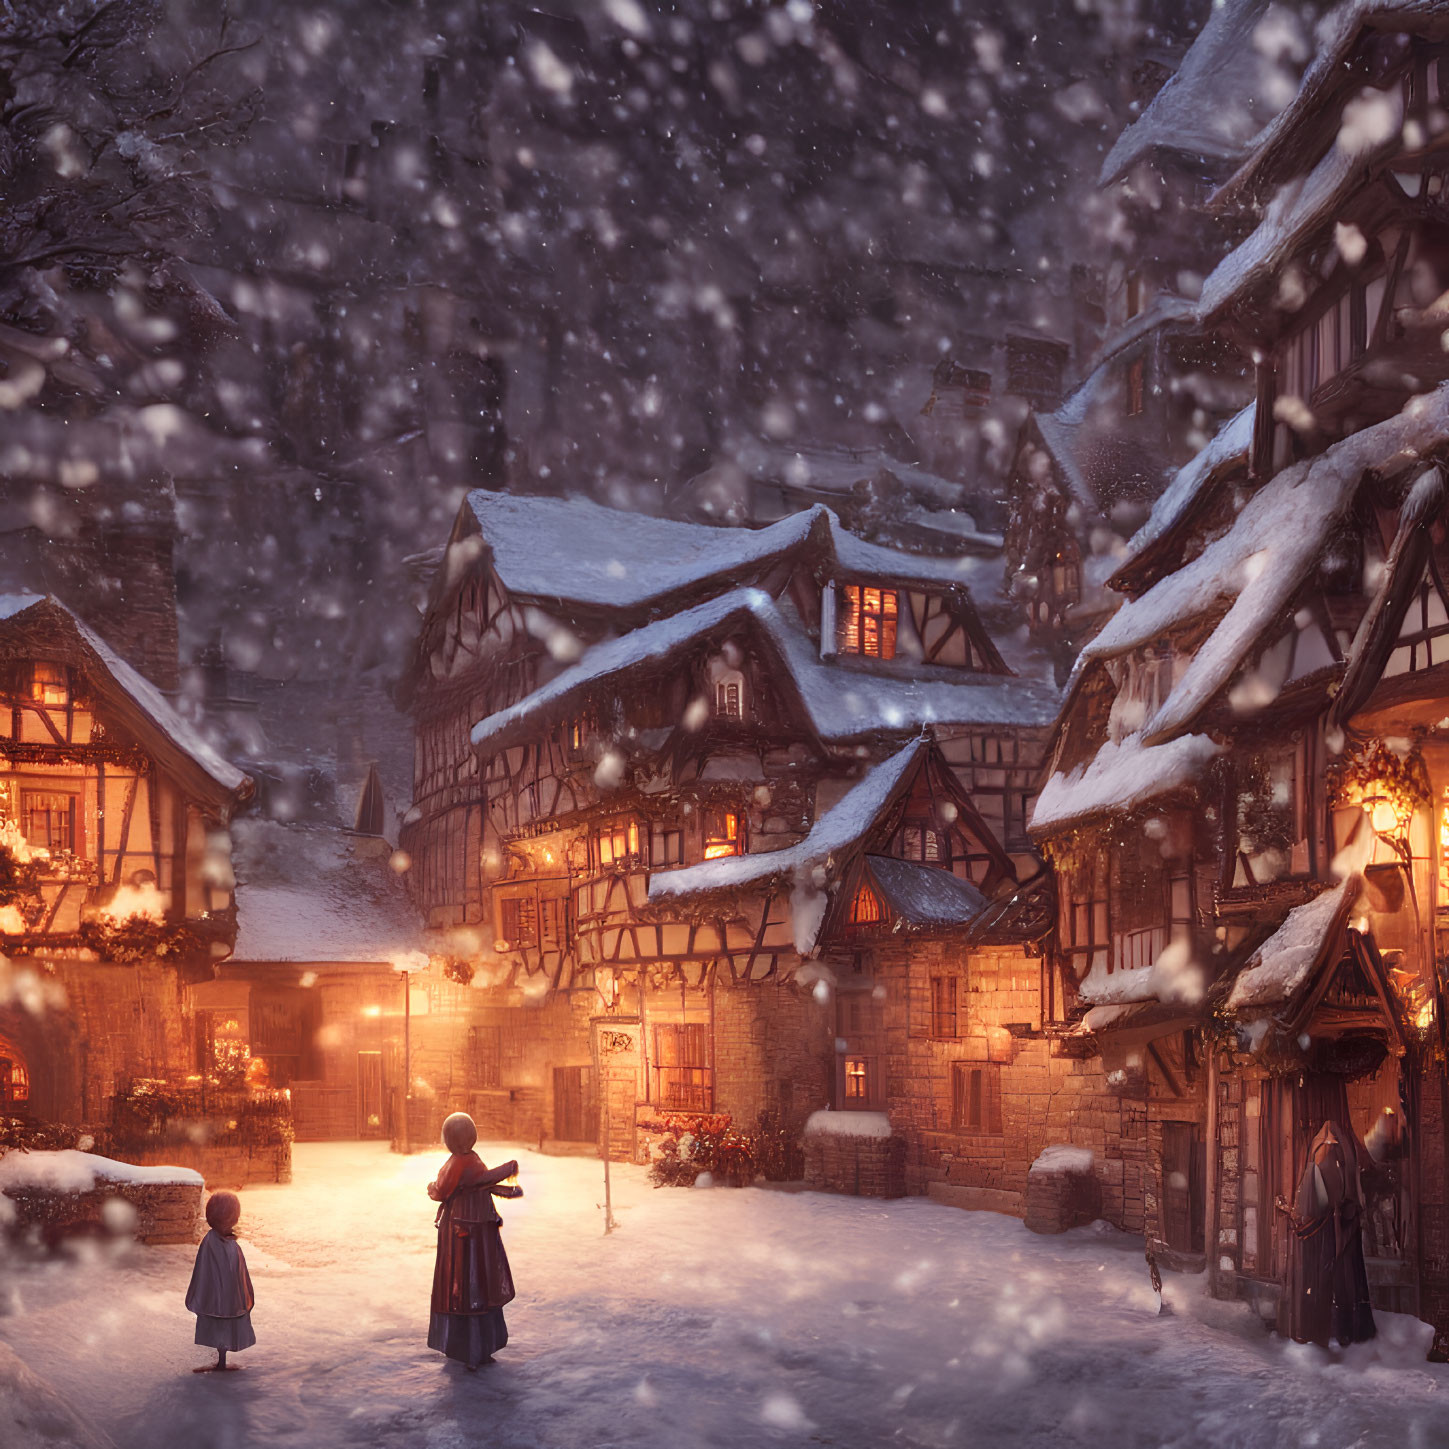 Snowy Evening Scene: Quaint Village with Half-Timbered Houses